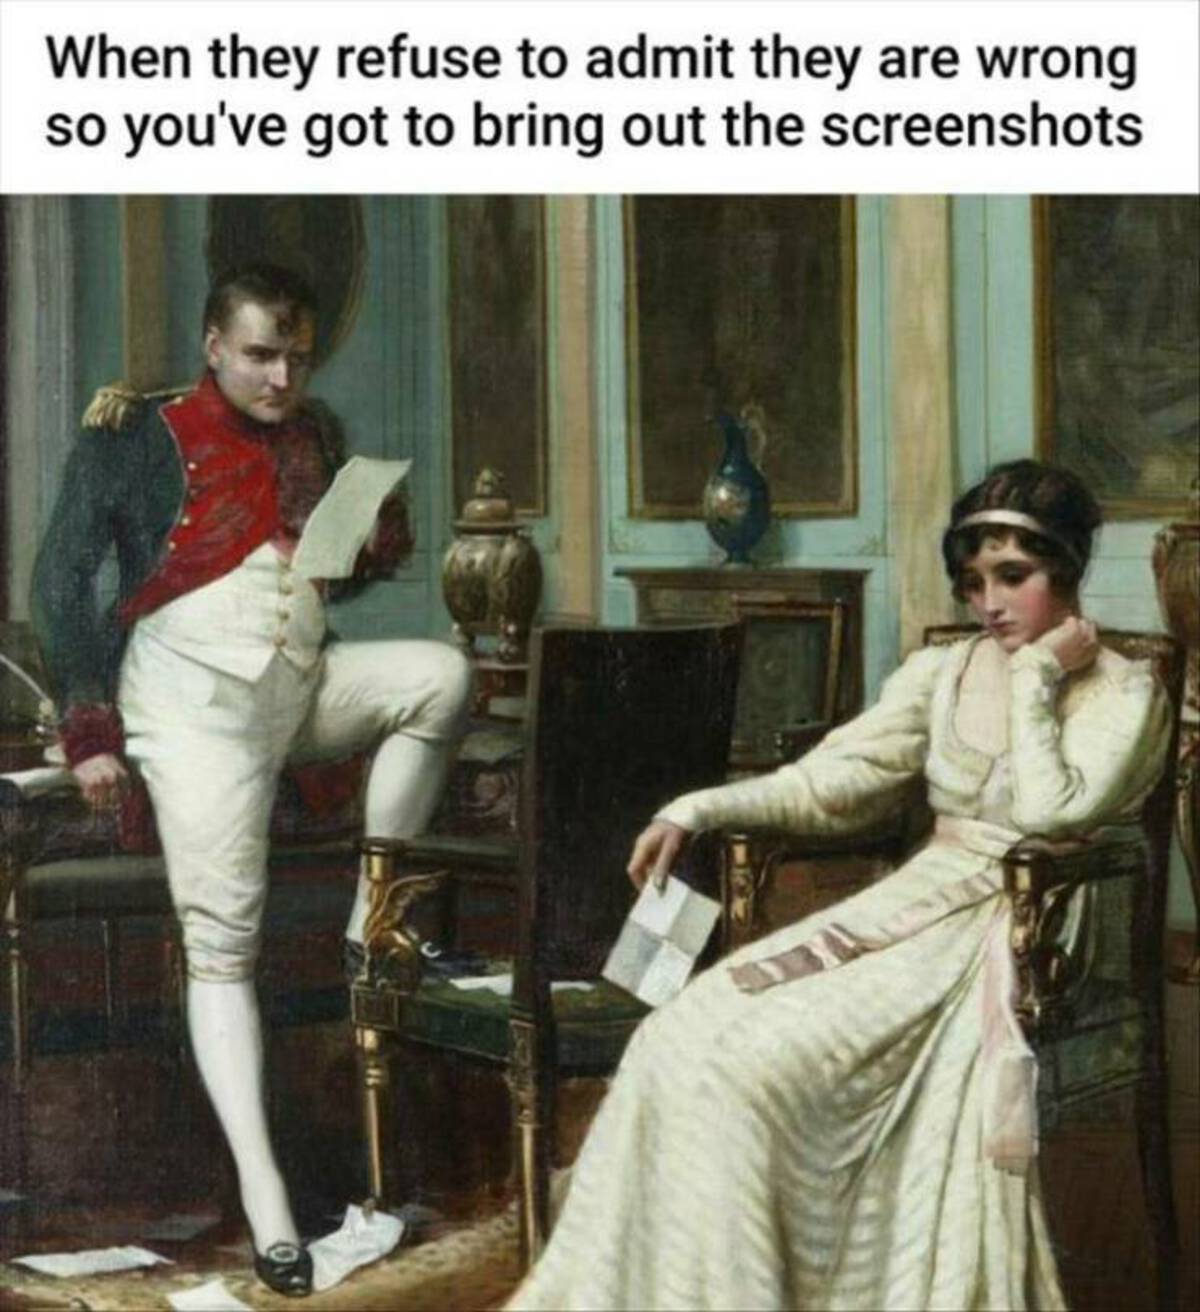 napoleon and women - When they refuse to admit they are wrong so you've got to bring out the screenshots